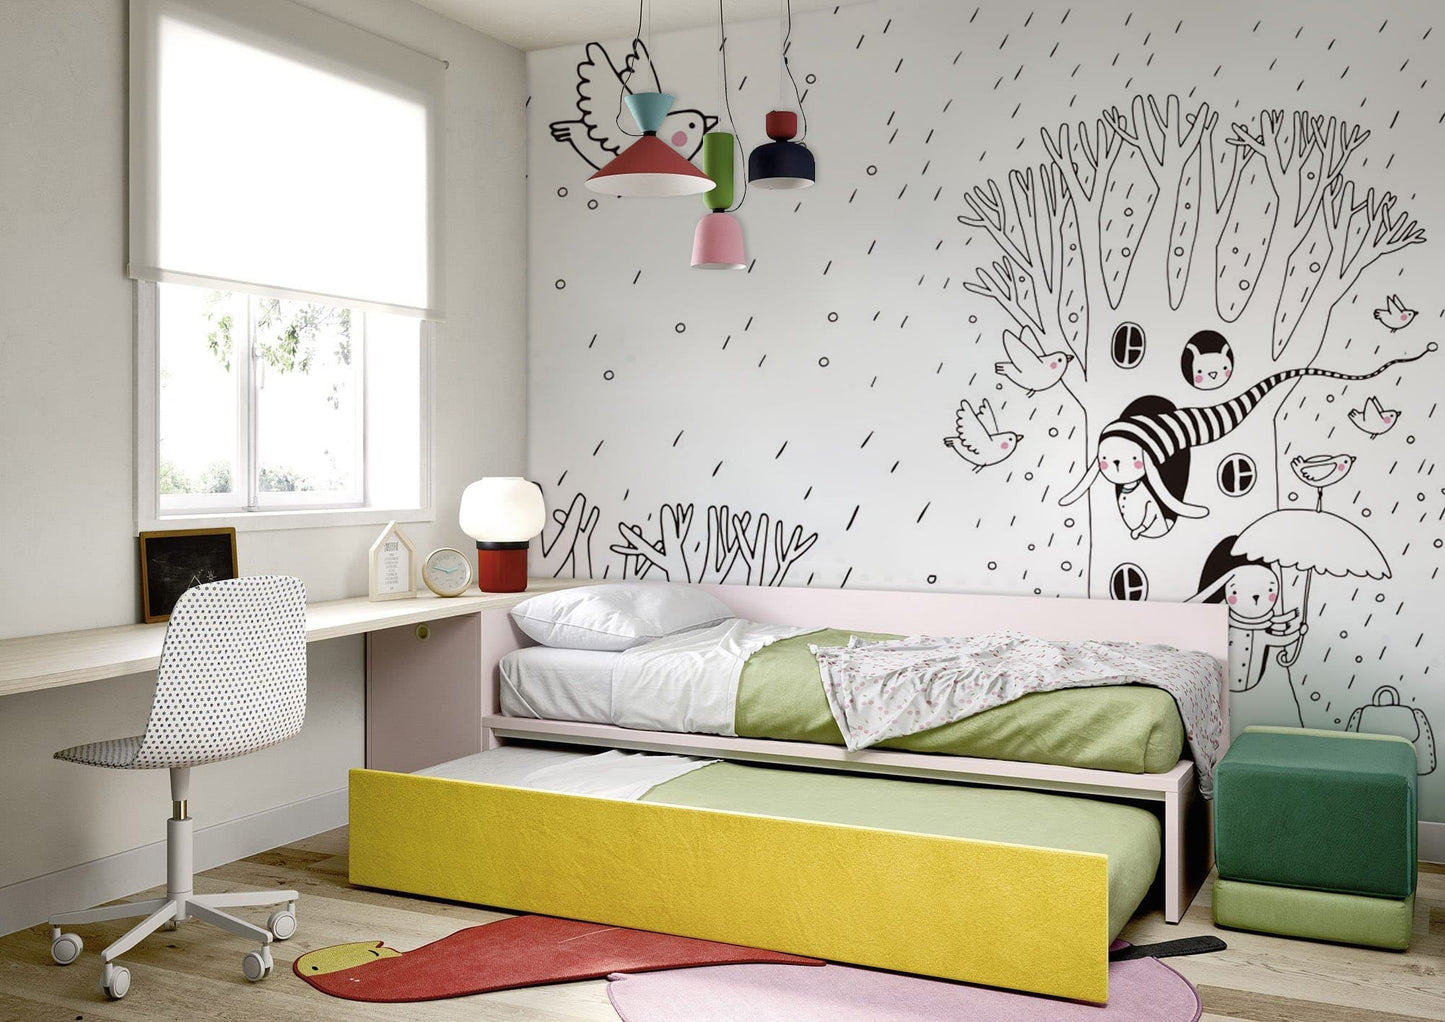 Birds on the Tree Cartoon Wall Mural Wallpaper for Use in Decorating Bedrooms